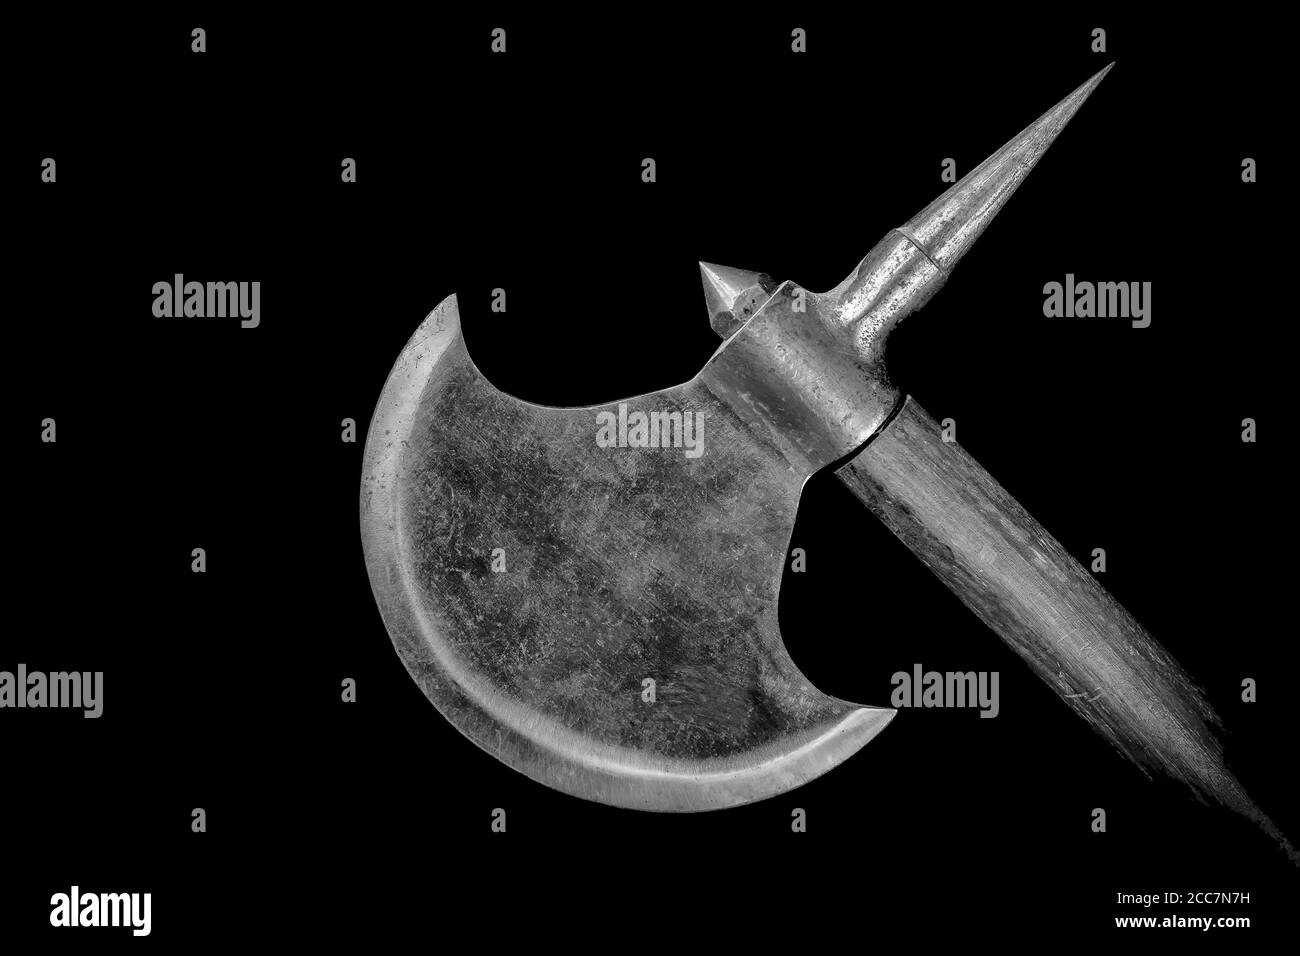 The blade of a headsman's axe. Only the blade and a bit of the handle visible. Black background, black and white image. Stock Photo